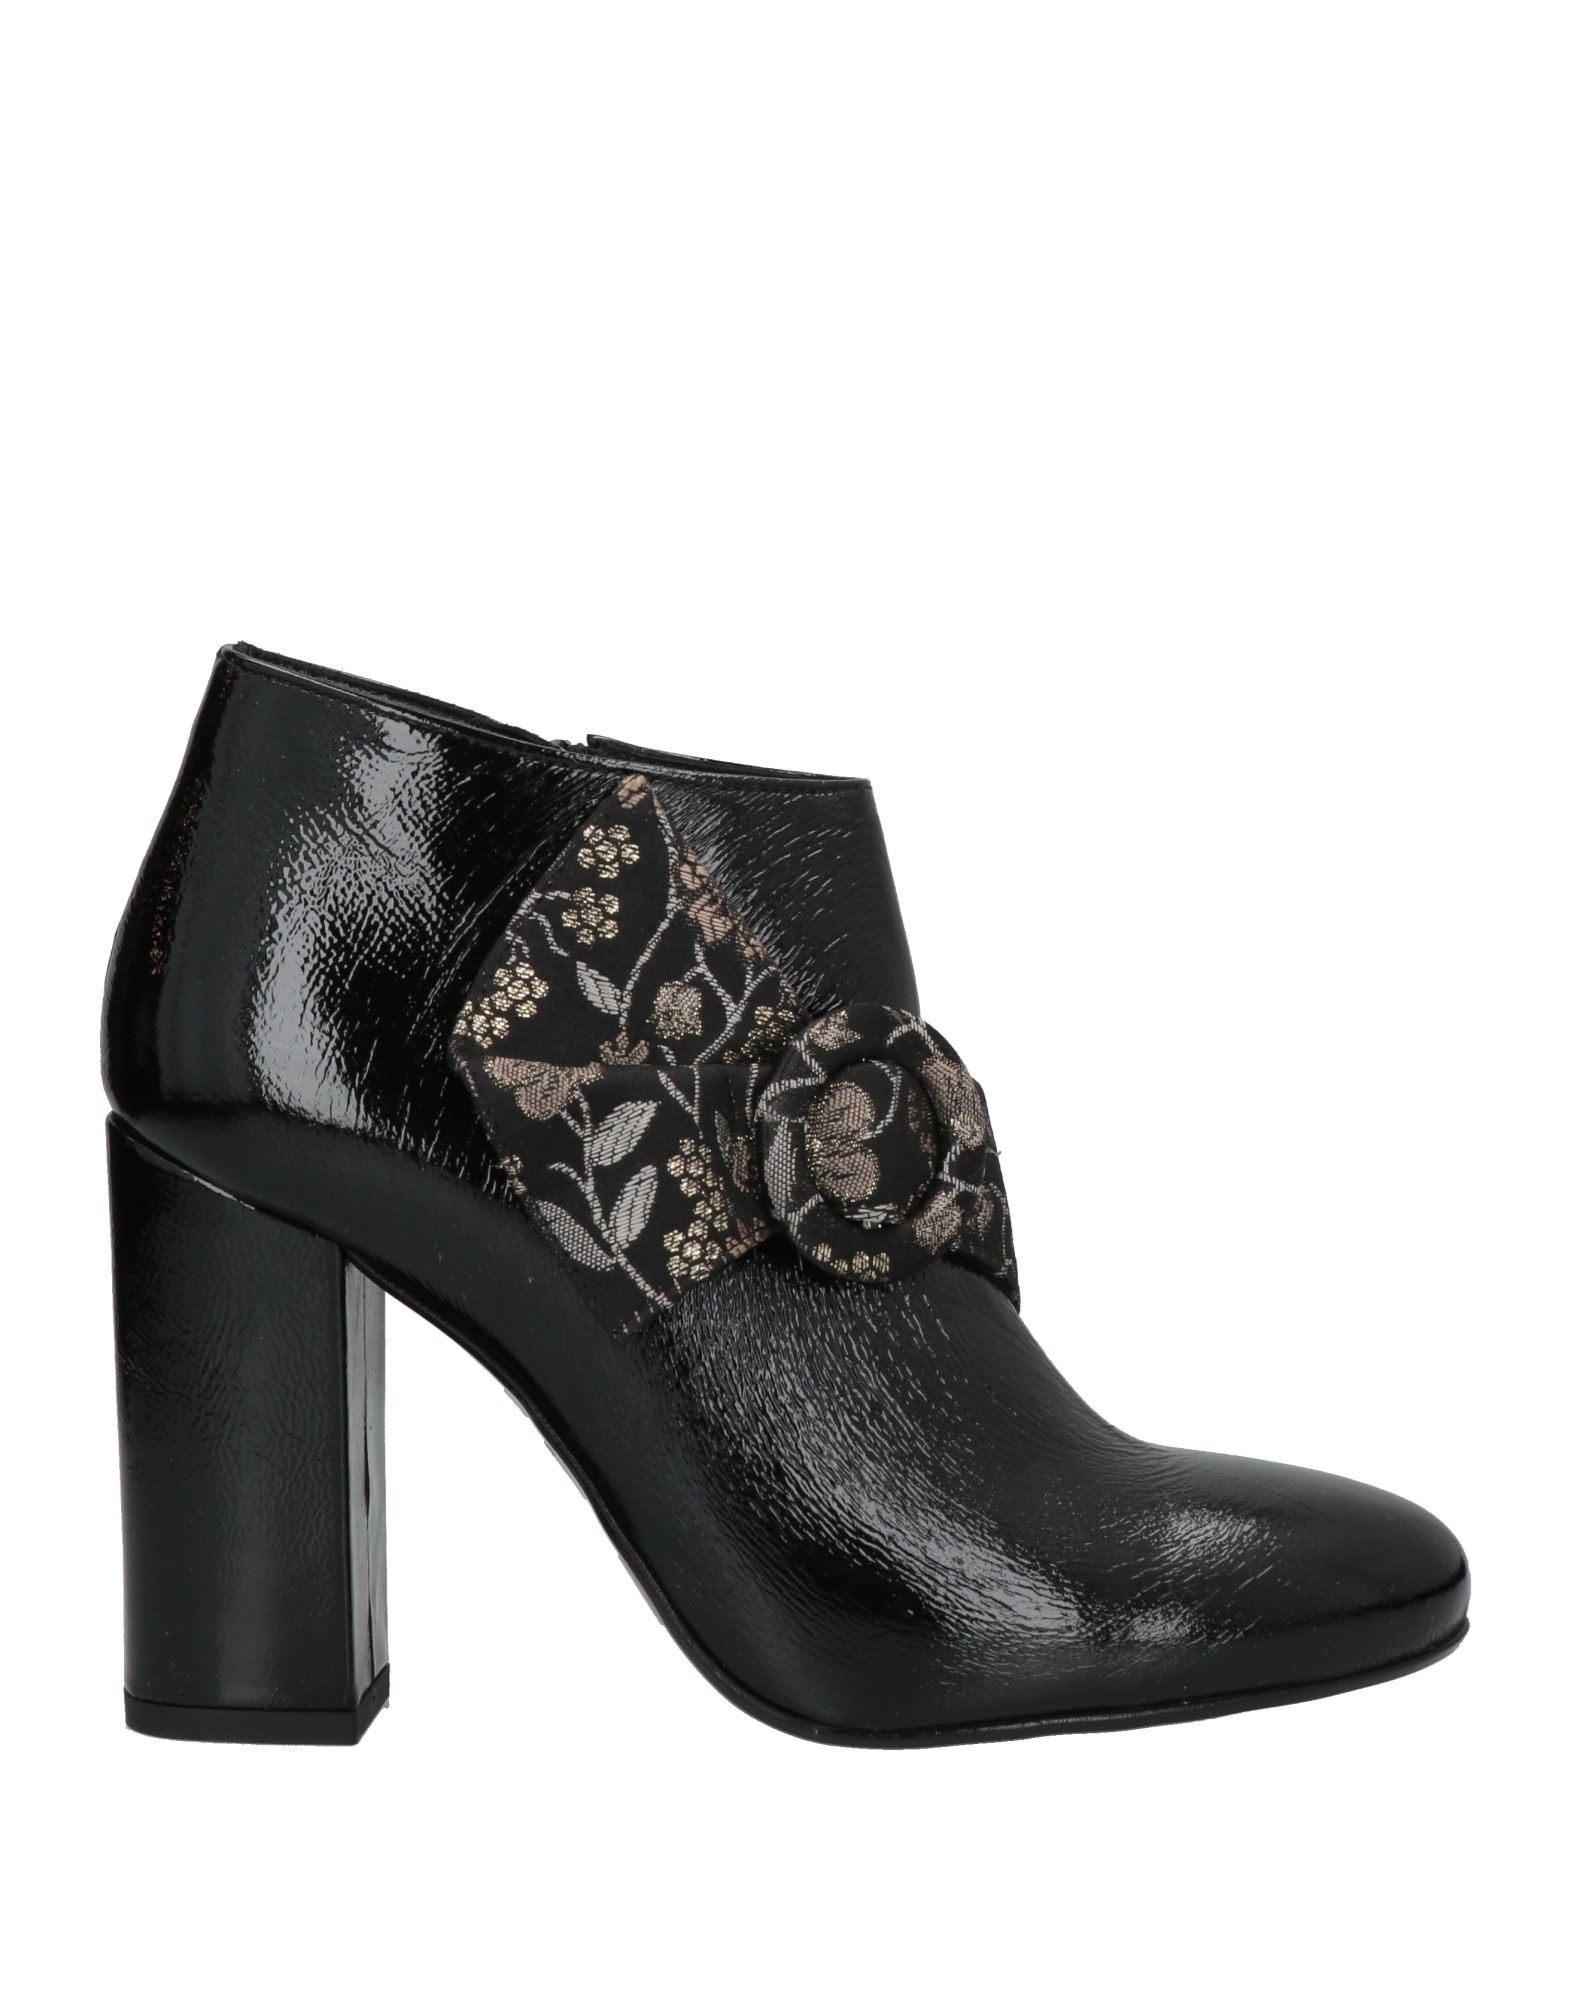 Sgn Giancarlo Paoli Ankle Boots In Black